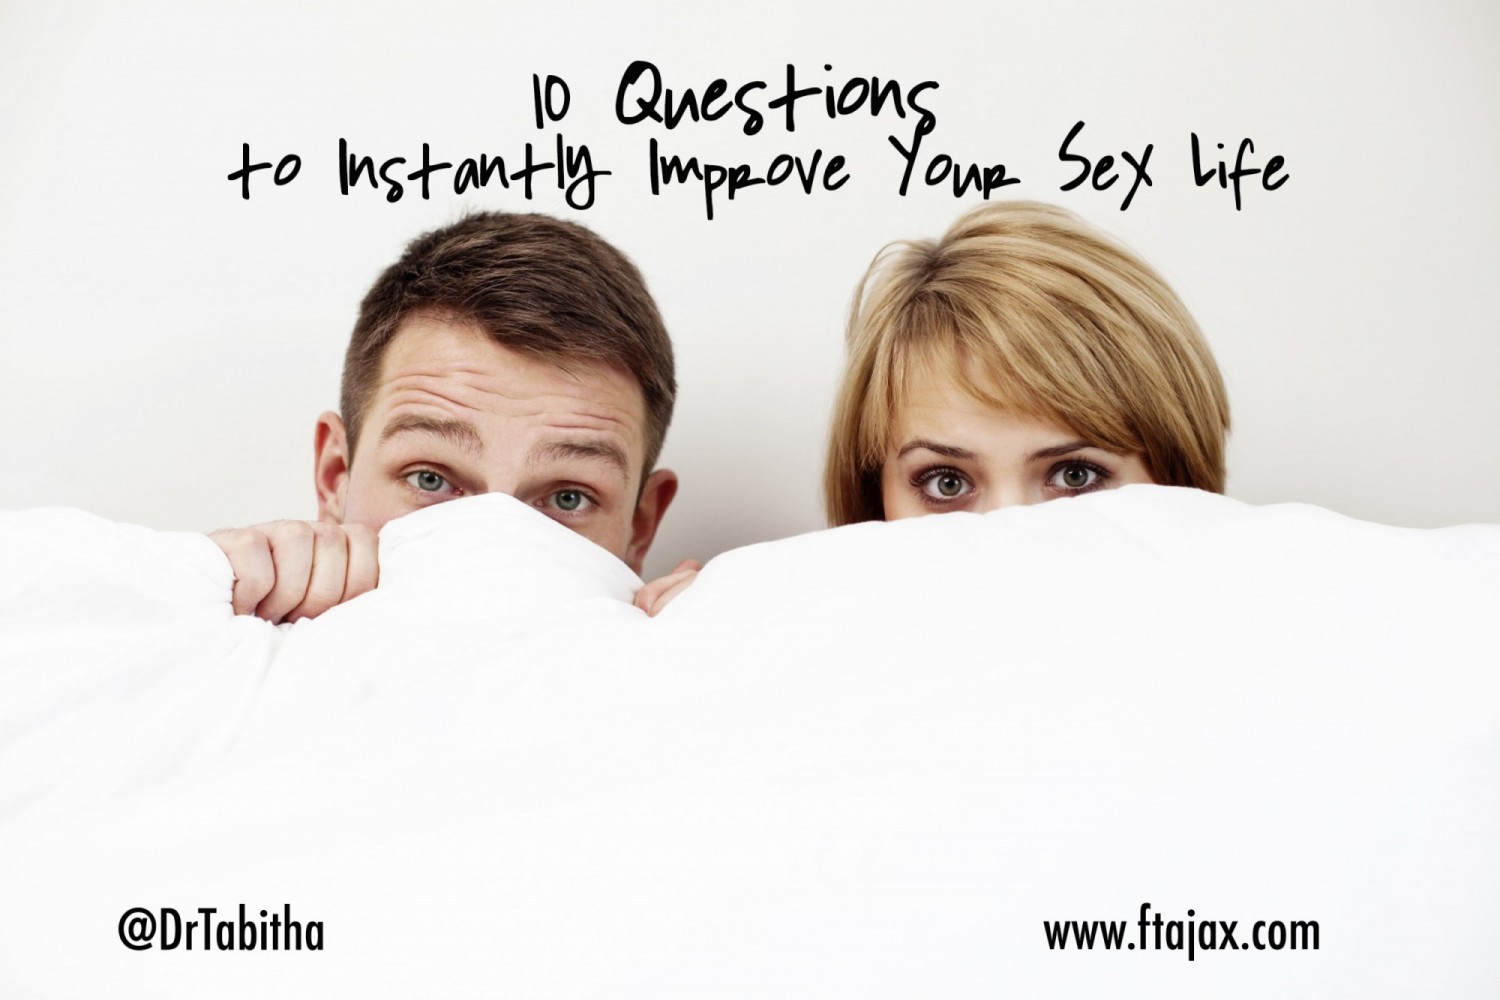 10 Questions To Instantly Improve Your Sex Life